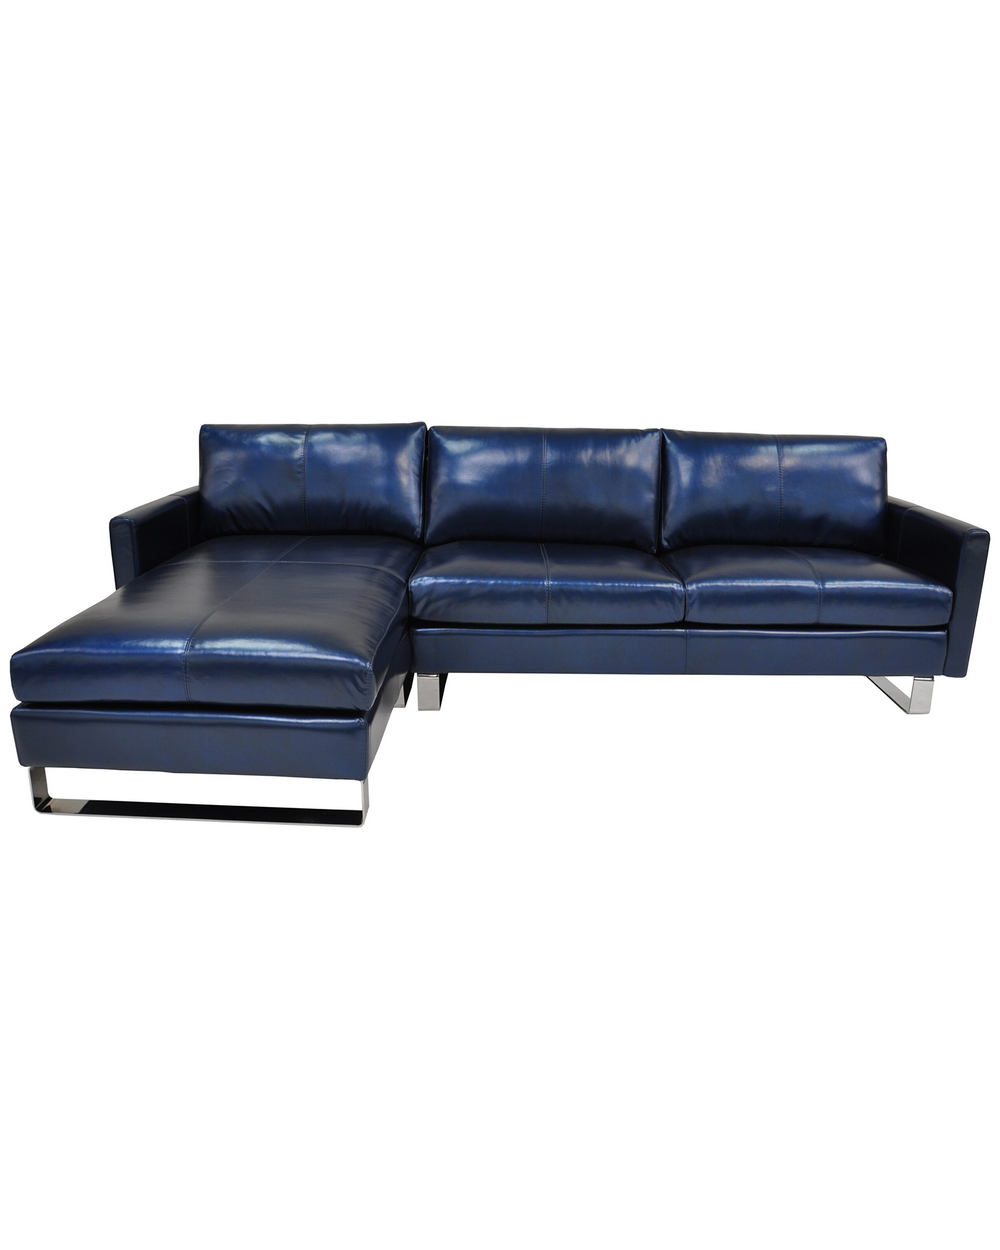 Omnia - Concord - Sofa with Chaise on Left